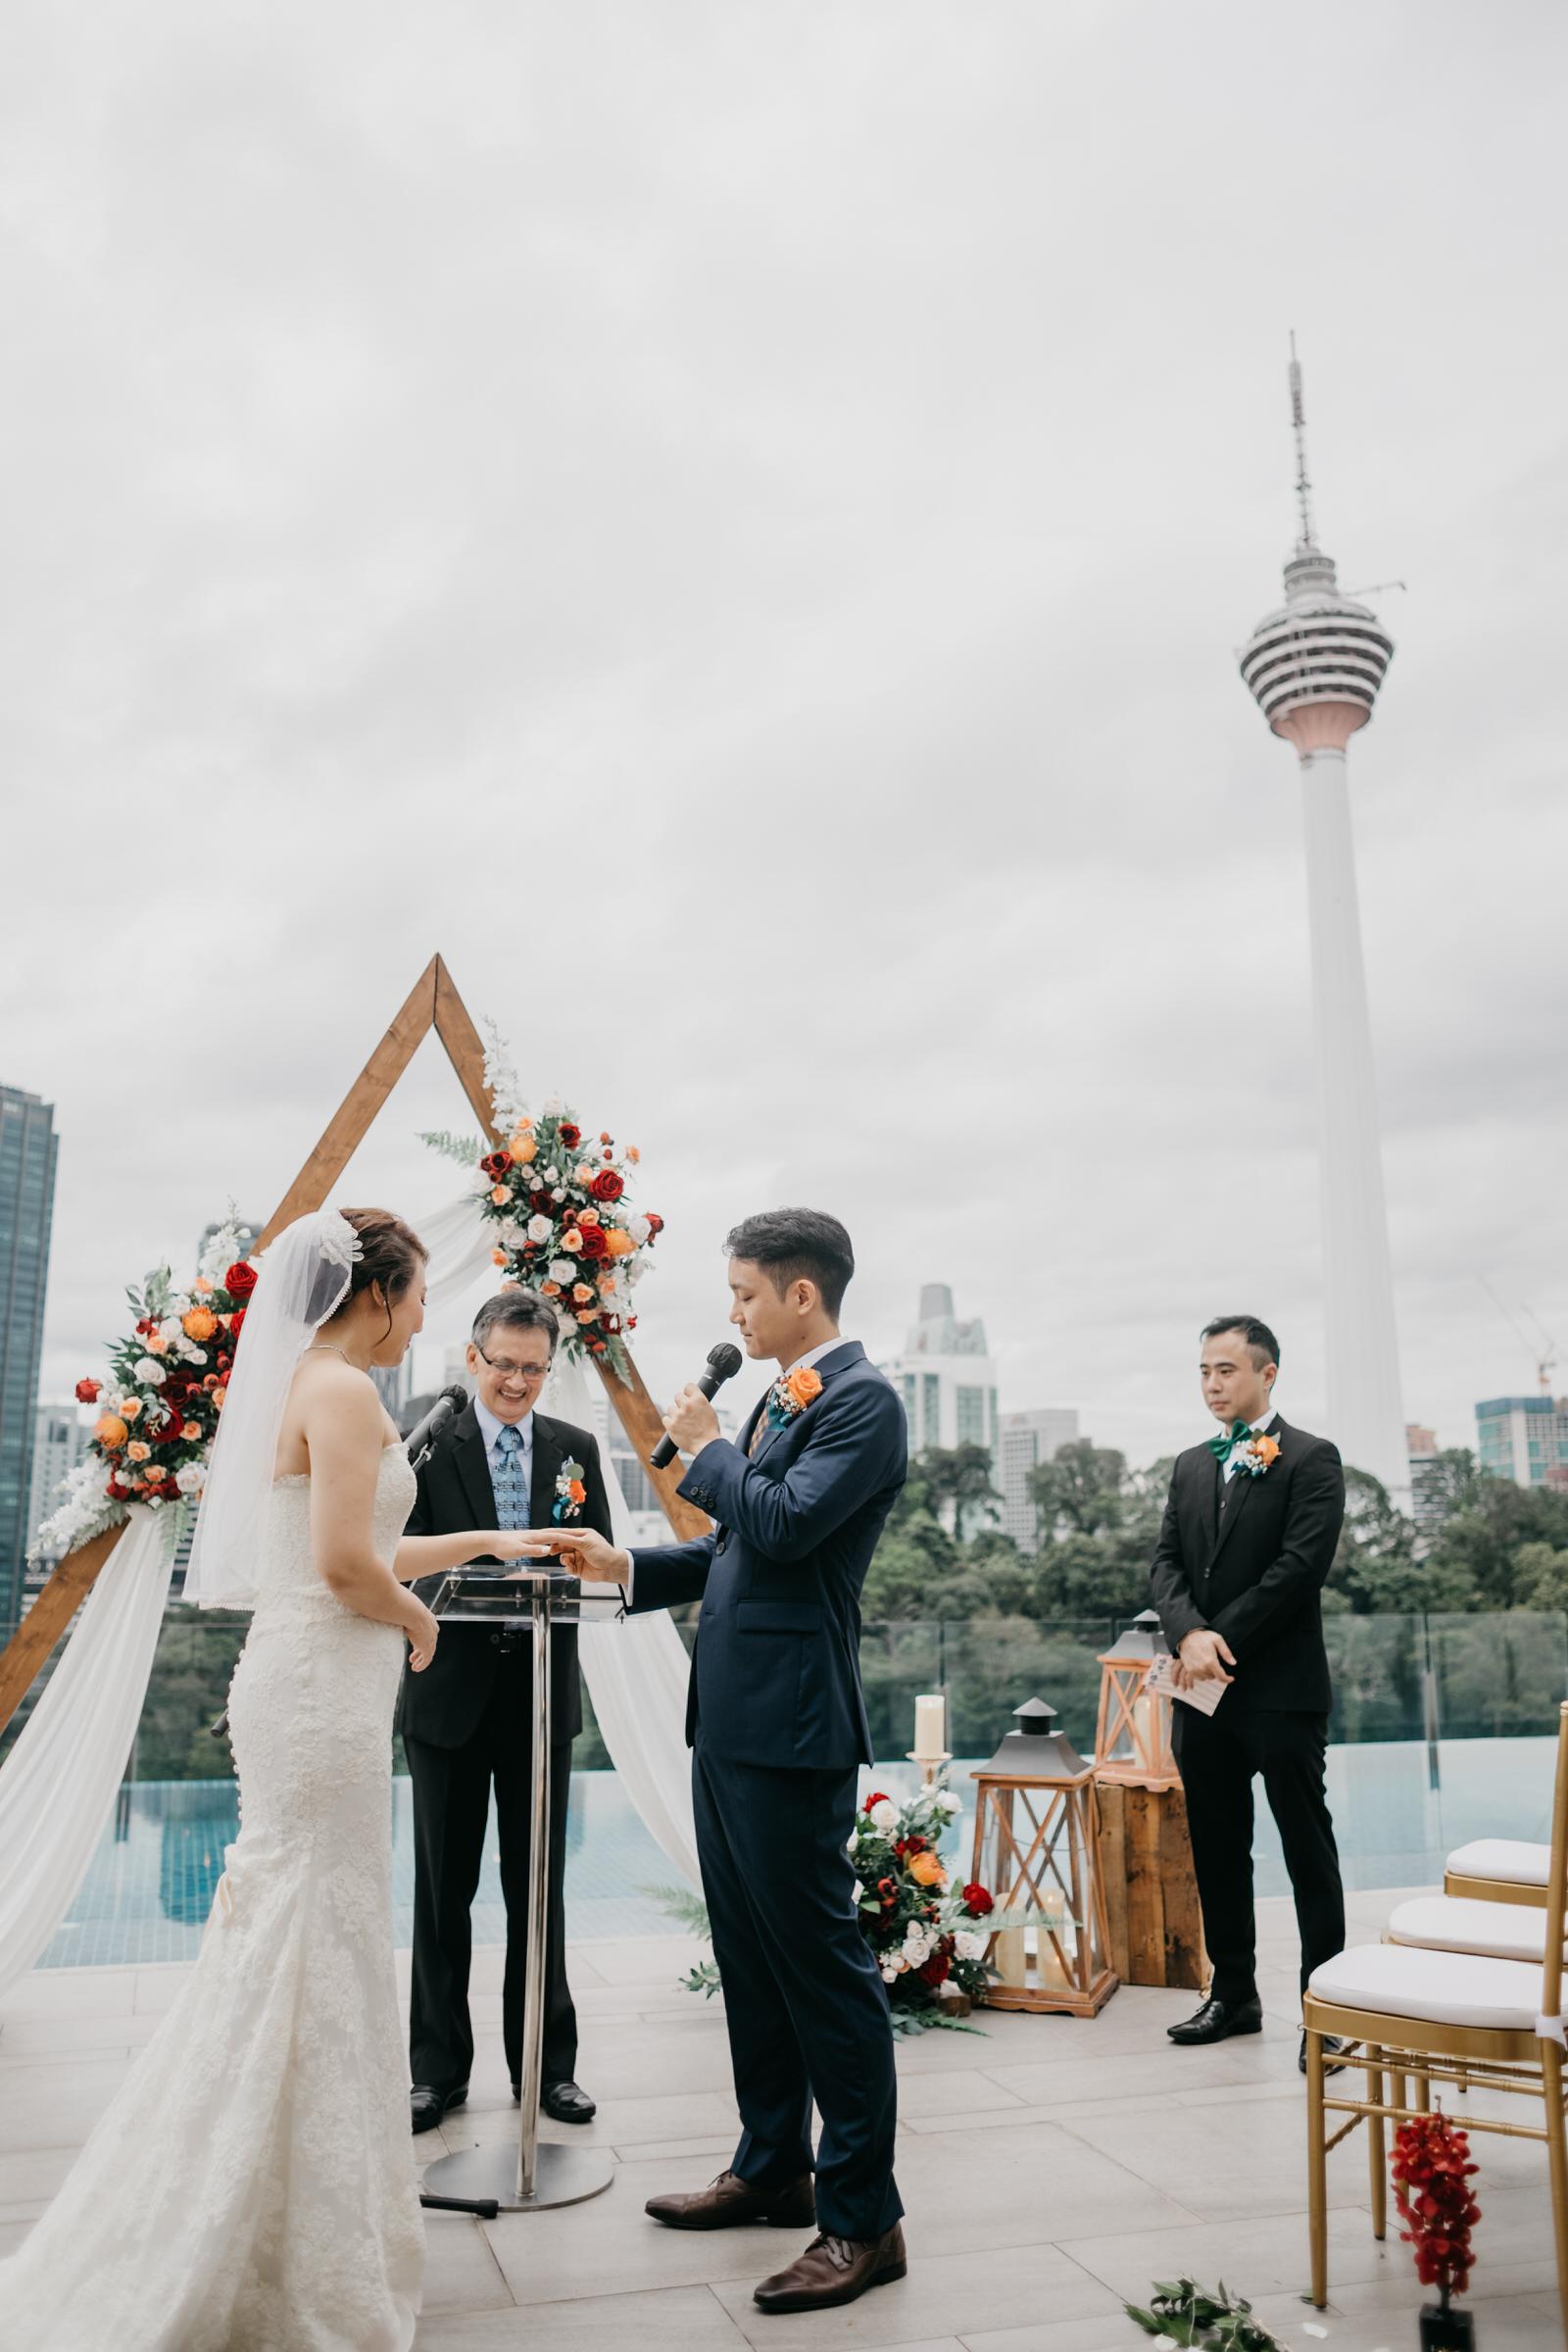 Vow Rings Exchange Boho Deco Rooftop Poolside Wedding at Hotel Stripes Kuala Lumpur MCO2.0 Cliff Choong Photography Malaysia Covid19 ROM 